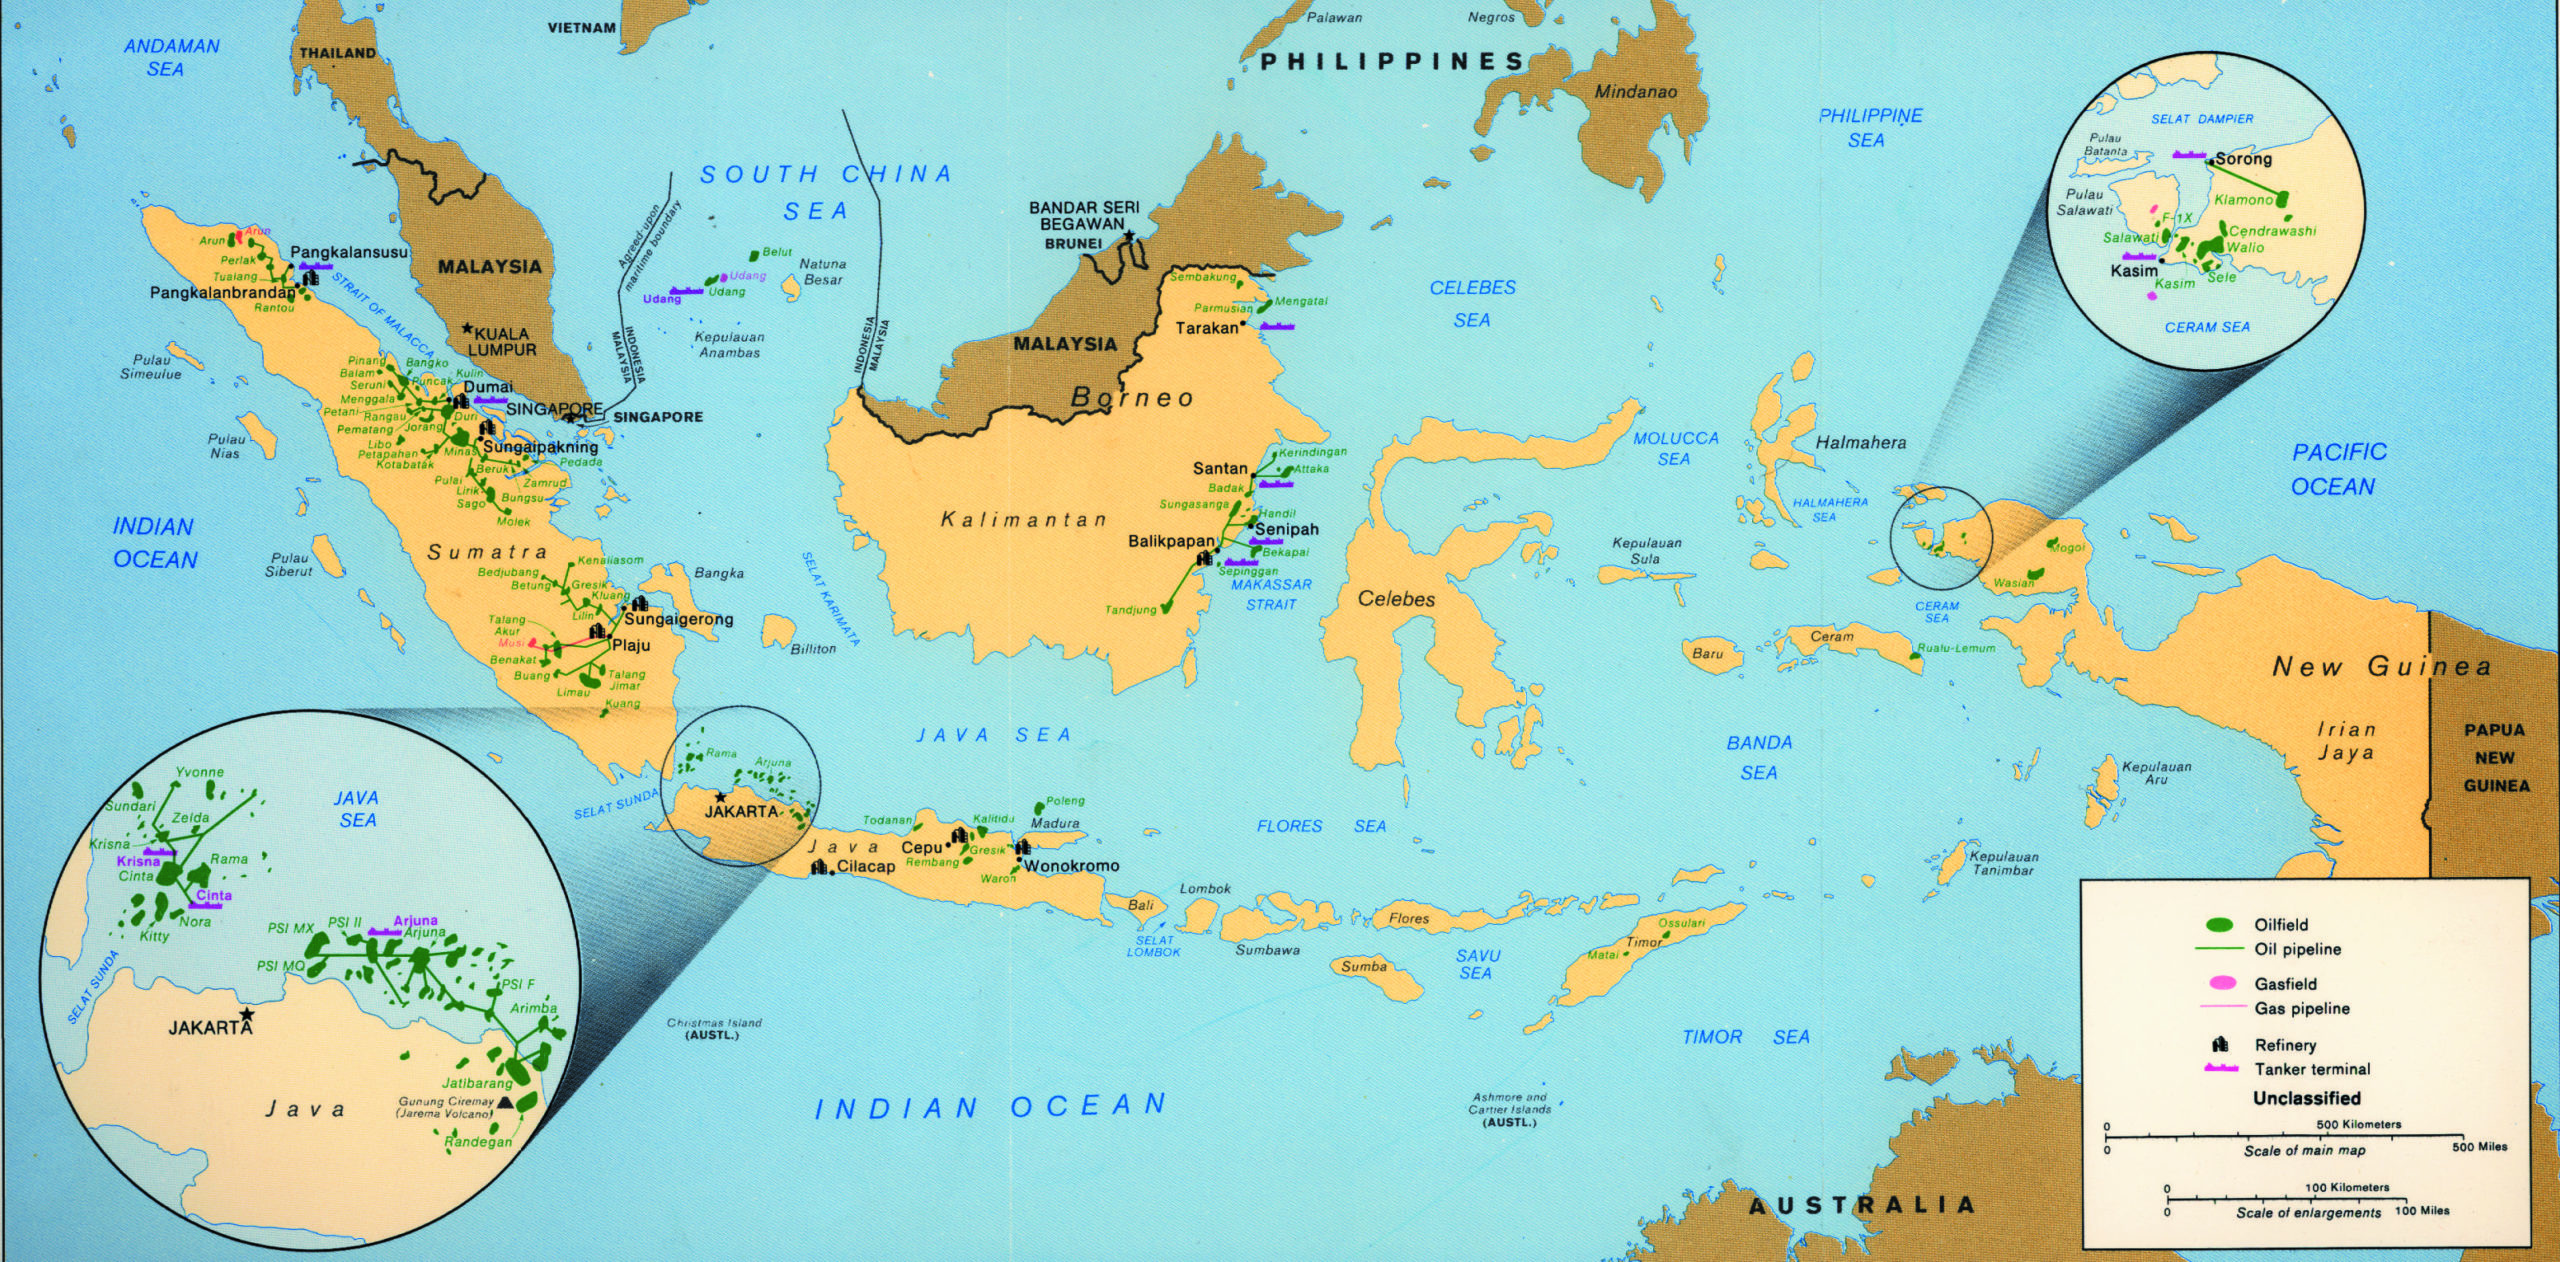 cia-cartography-centre-indonesia-oil-and-gas-map-geoawesomeness